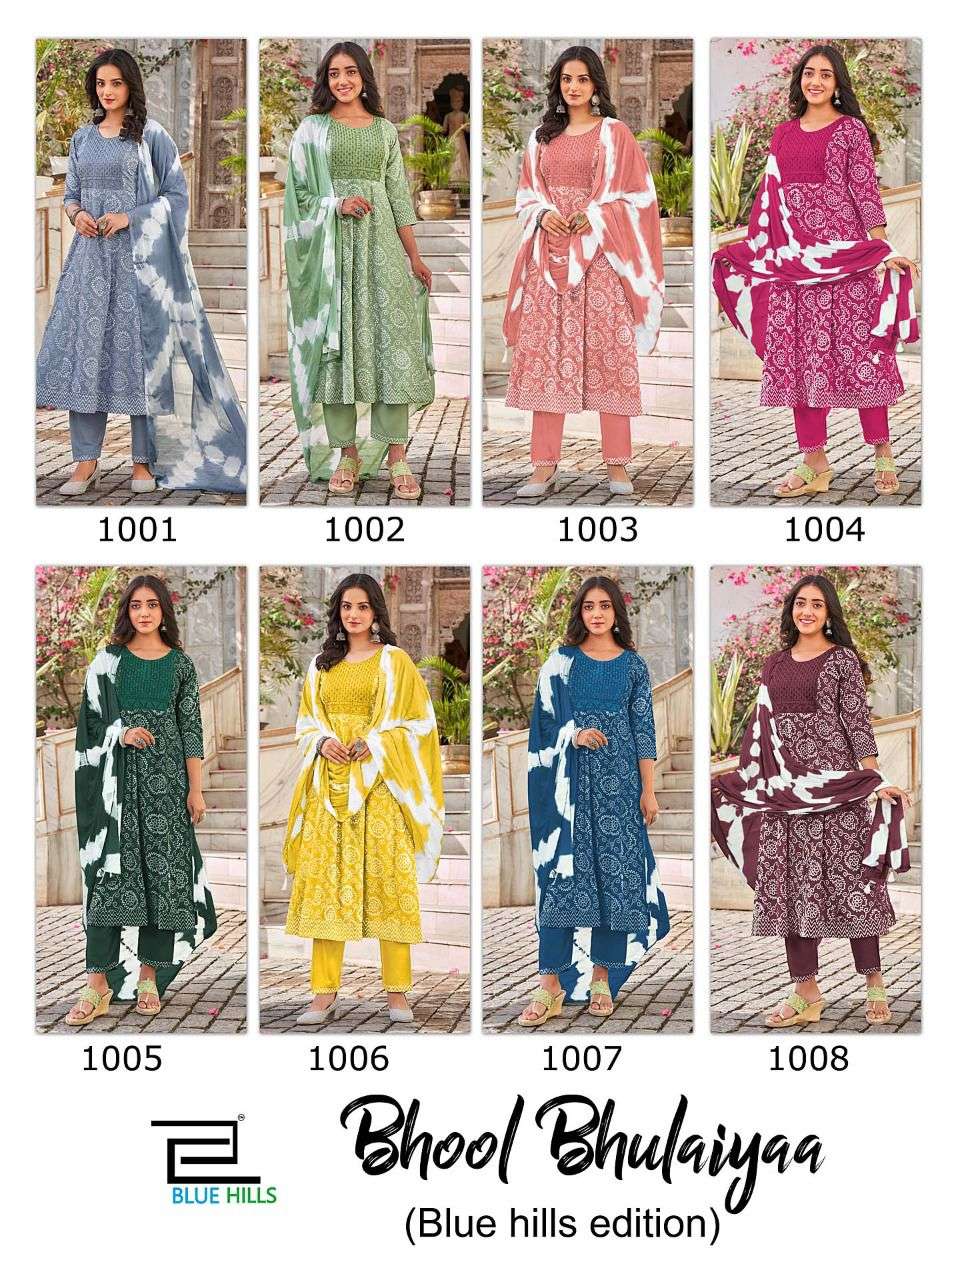 BLUE HILLS PRESENTS BHOOL BHULAIYAA PURE COTTON EMBROIDERY WHOLESALE READYMADE COLLECTION